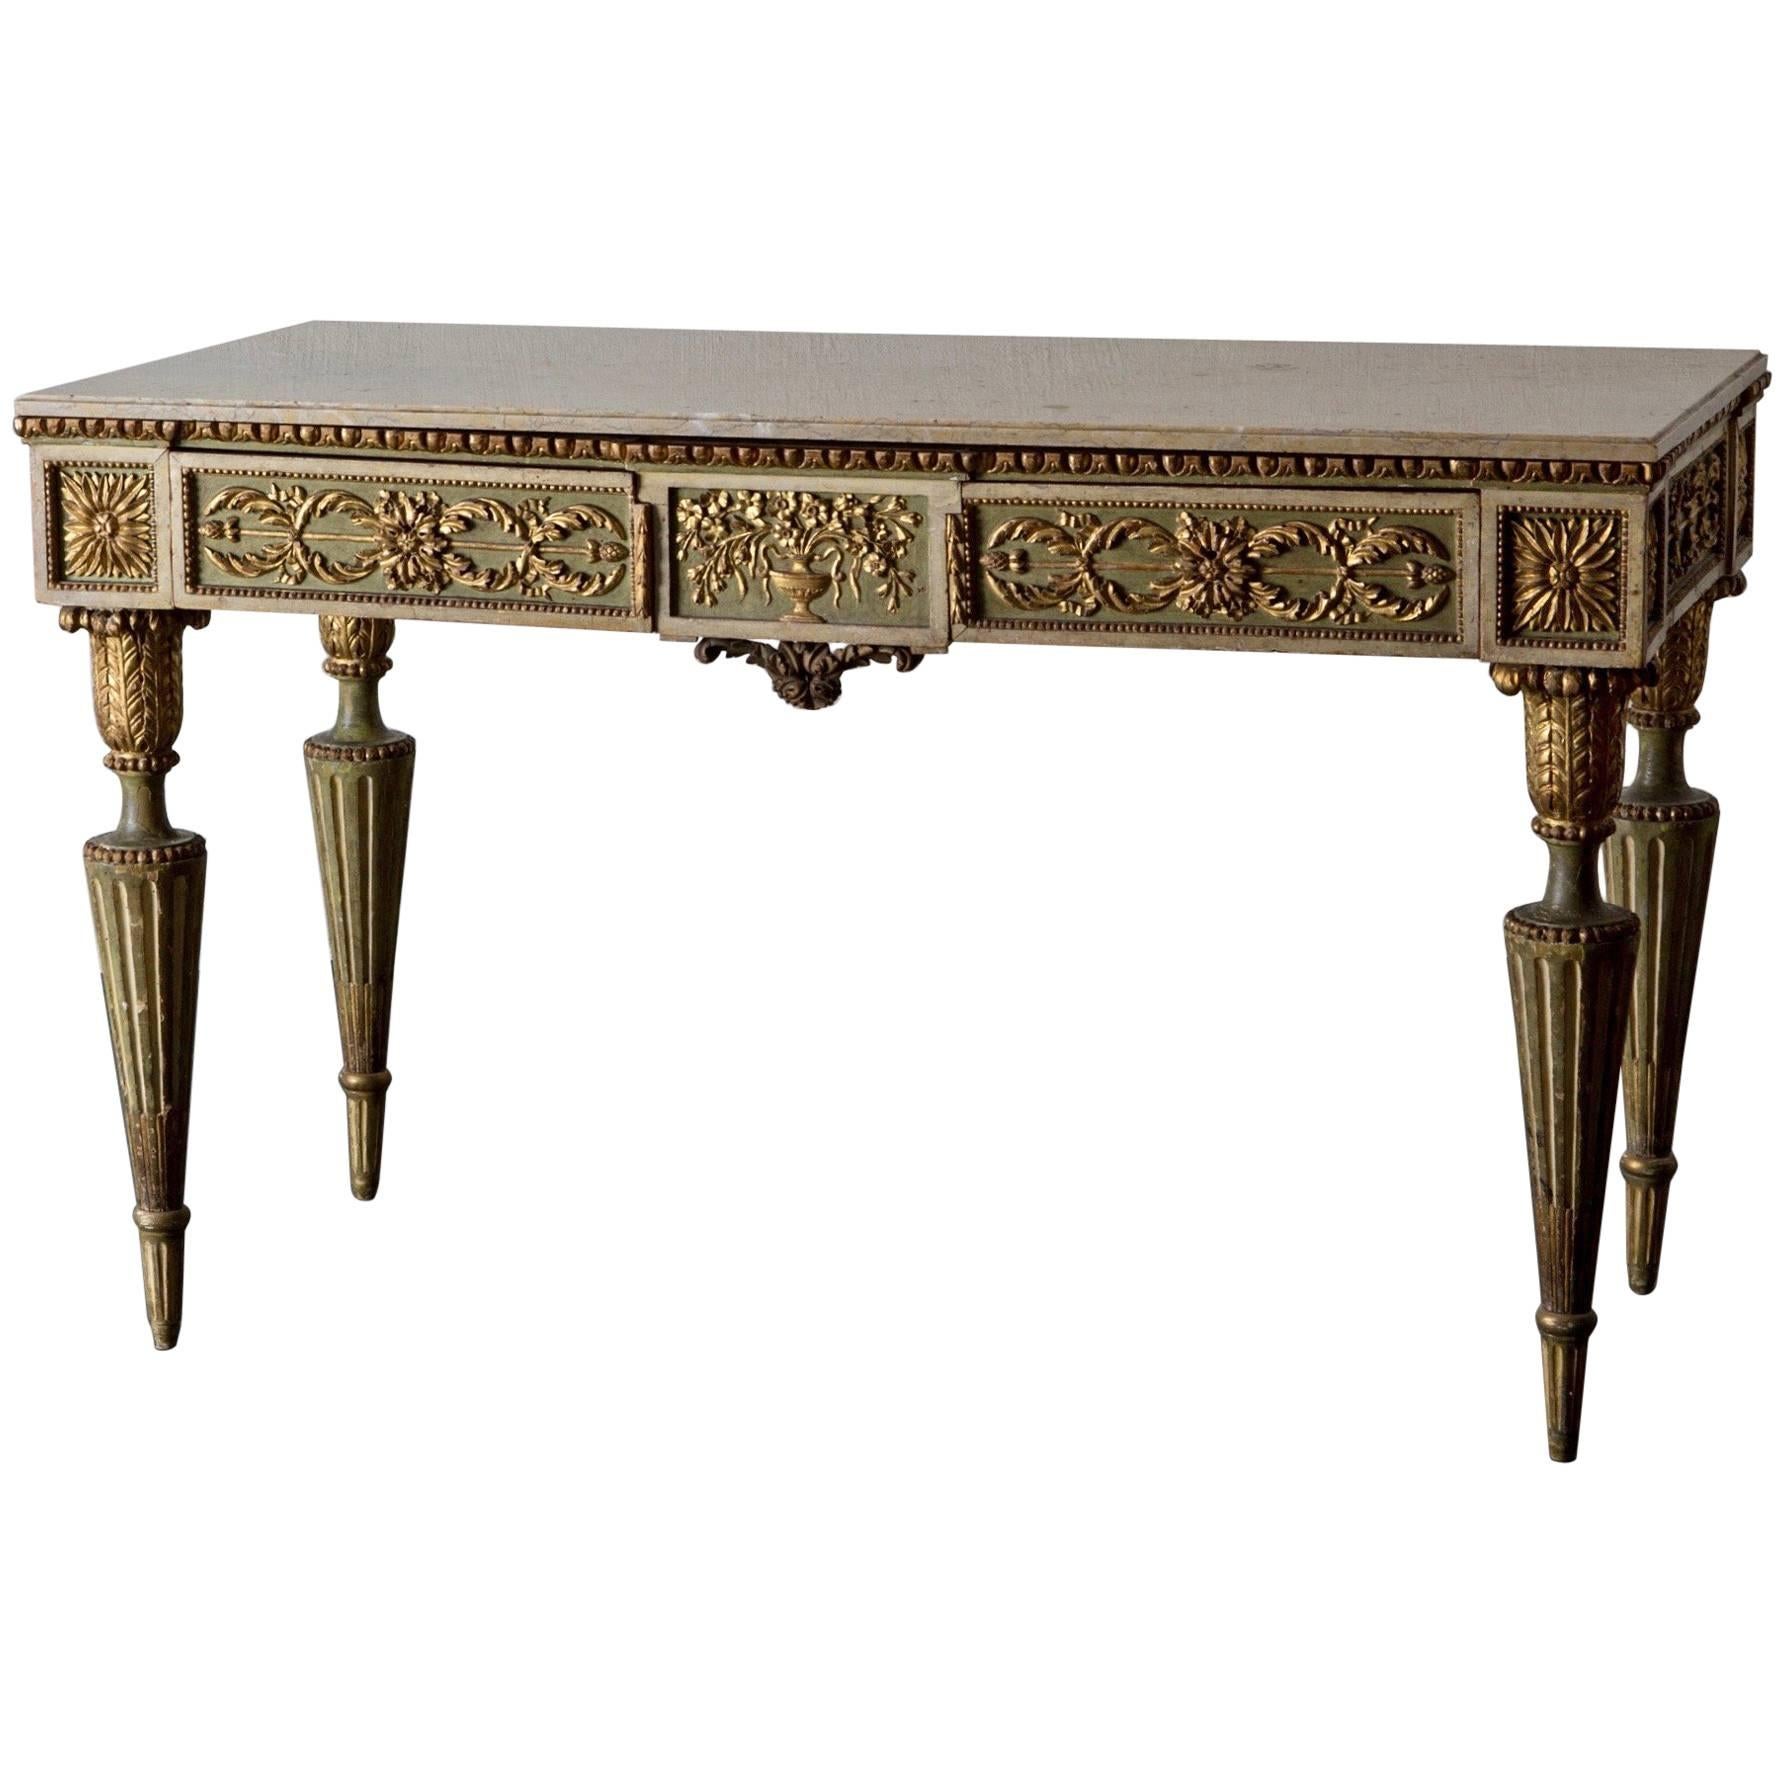 Console Table Italian Large Neoclassical Green Gilded 18th Century, Italy For Sale